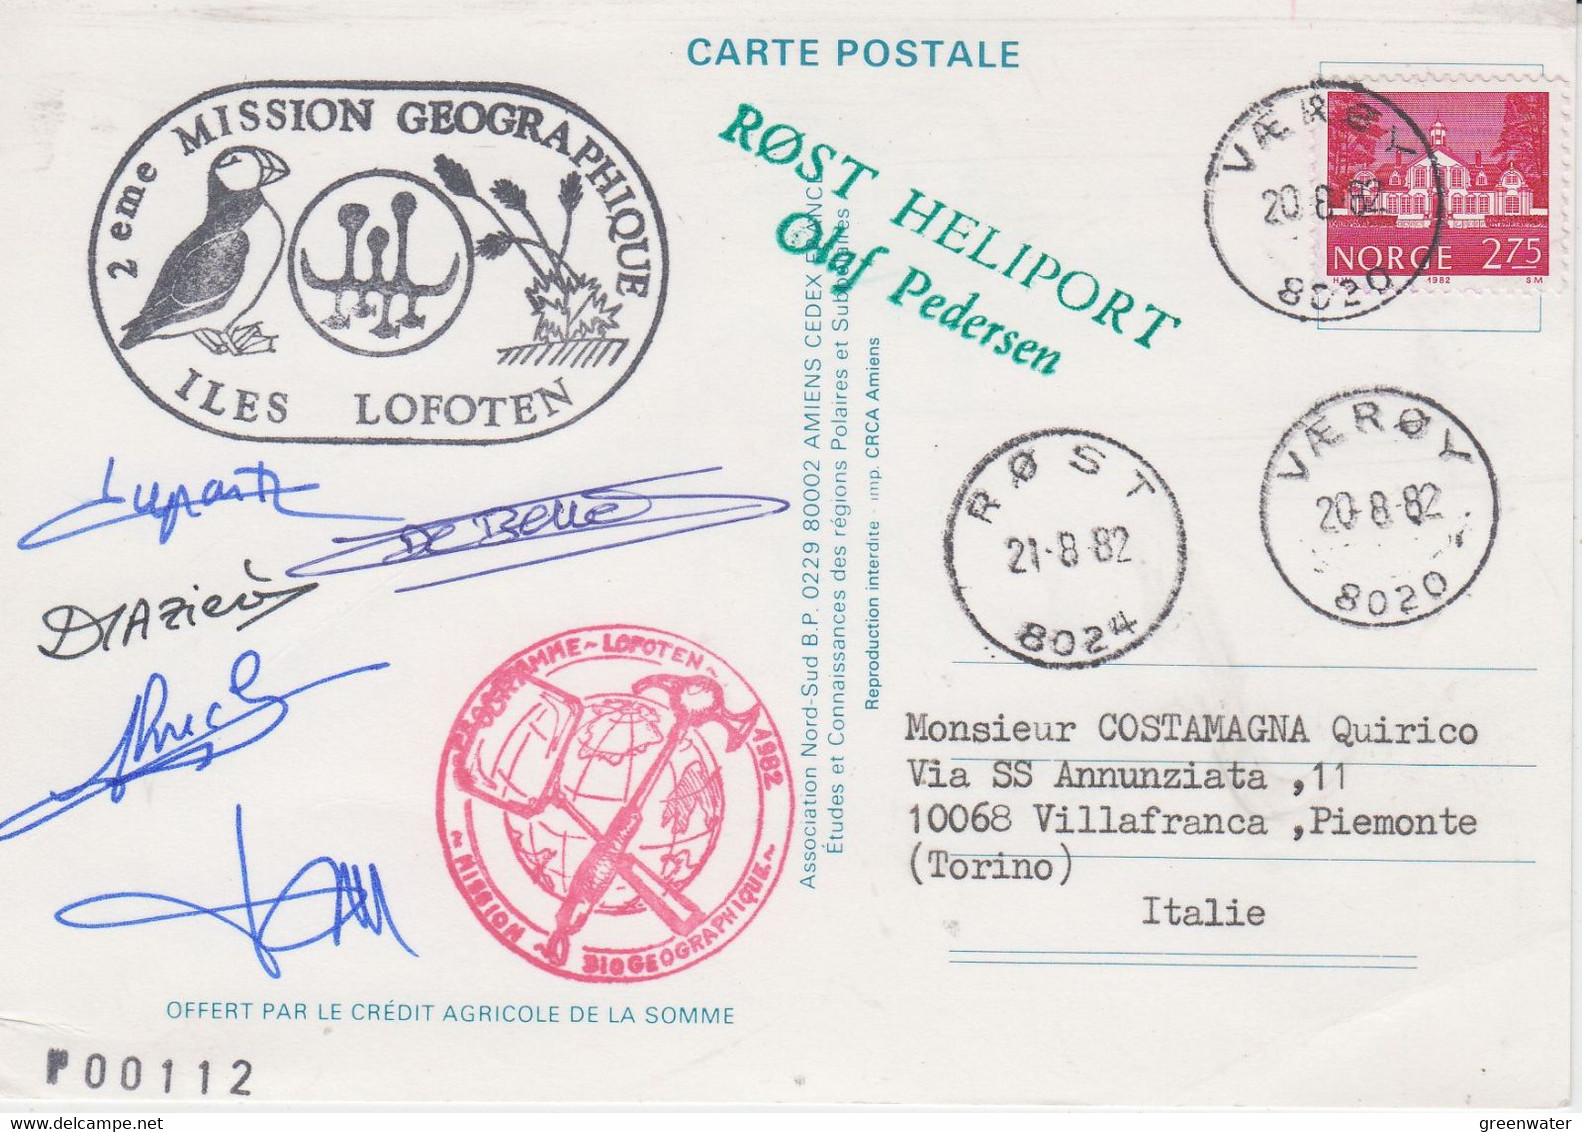 Norway 1982 Postcard Emile Victor  2eme Mission Georgraphique Ca Rost Heliport  5 Signatuires Ca Varoy 20-8-1982 (NW200) - Forschungsprogramme